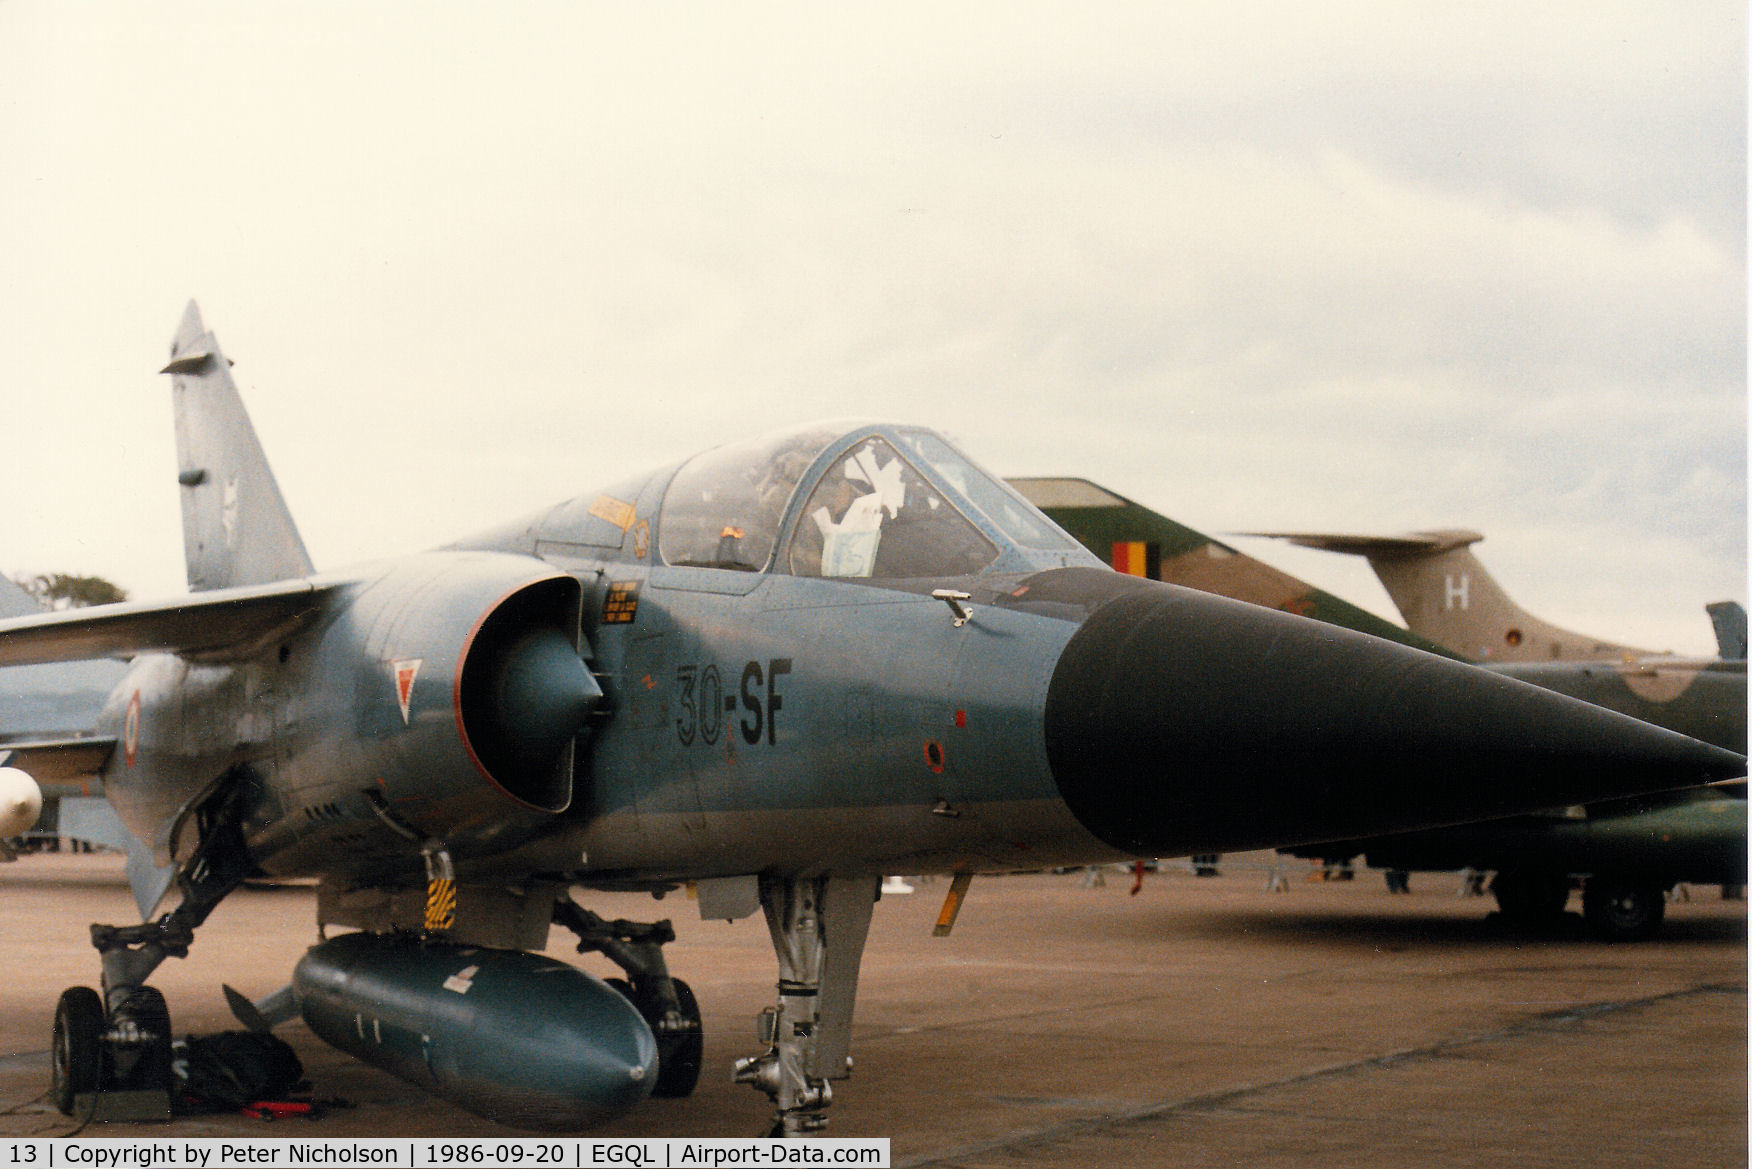 13, Dassault Mirage F.1C C/N Not found 13, Another view of the French Air Force Mirage F.1C of ECTT 1/30 on display at the 1986 RAF Leuchars Airshow.